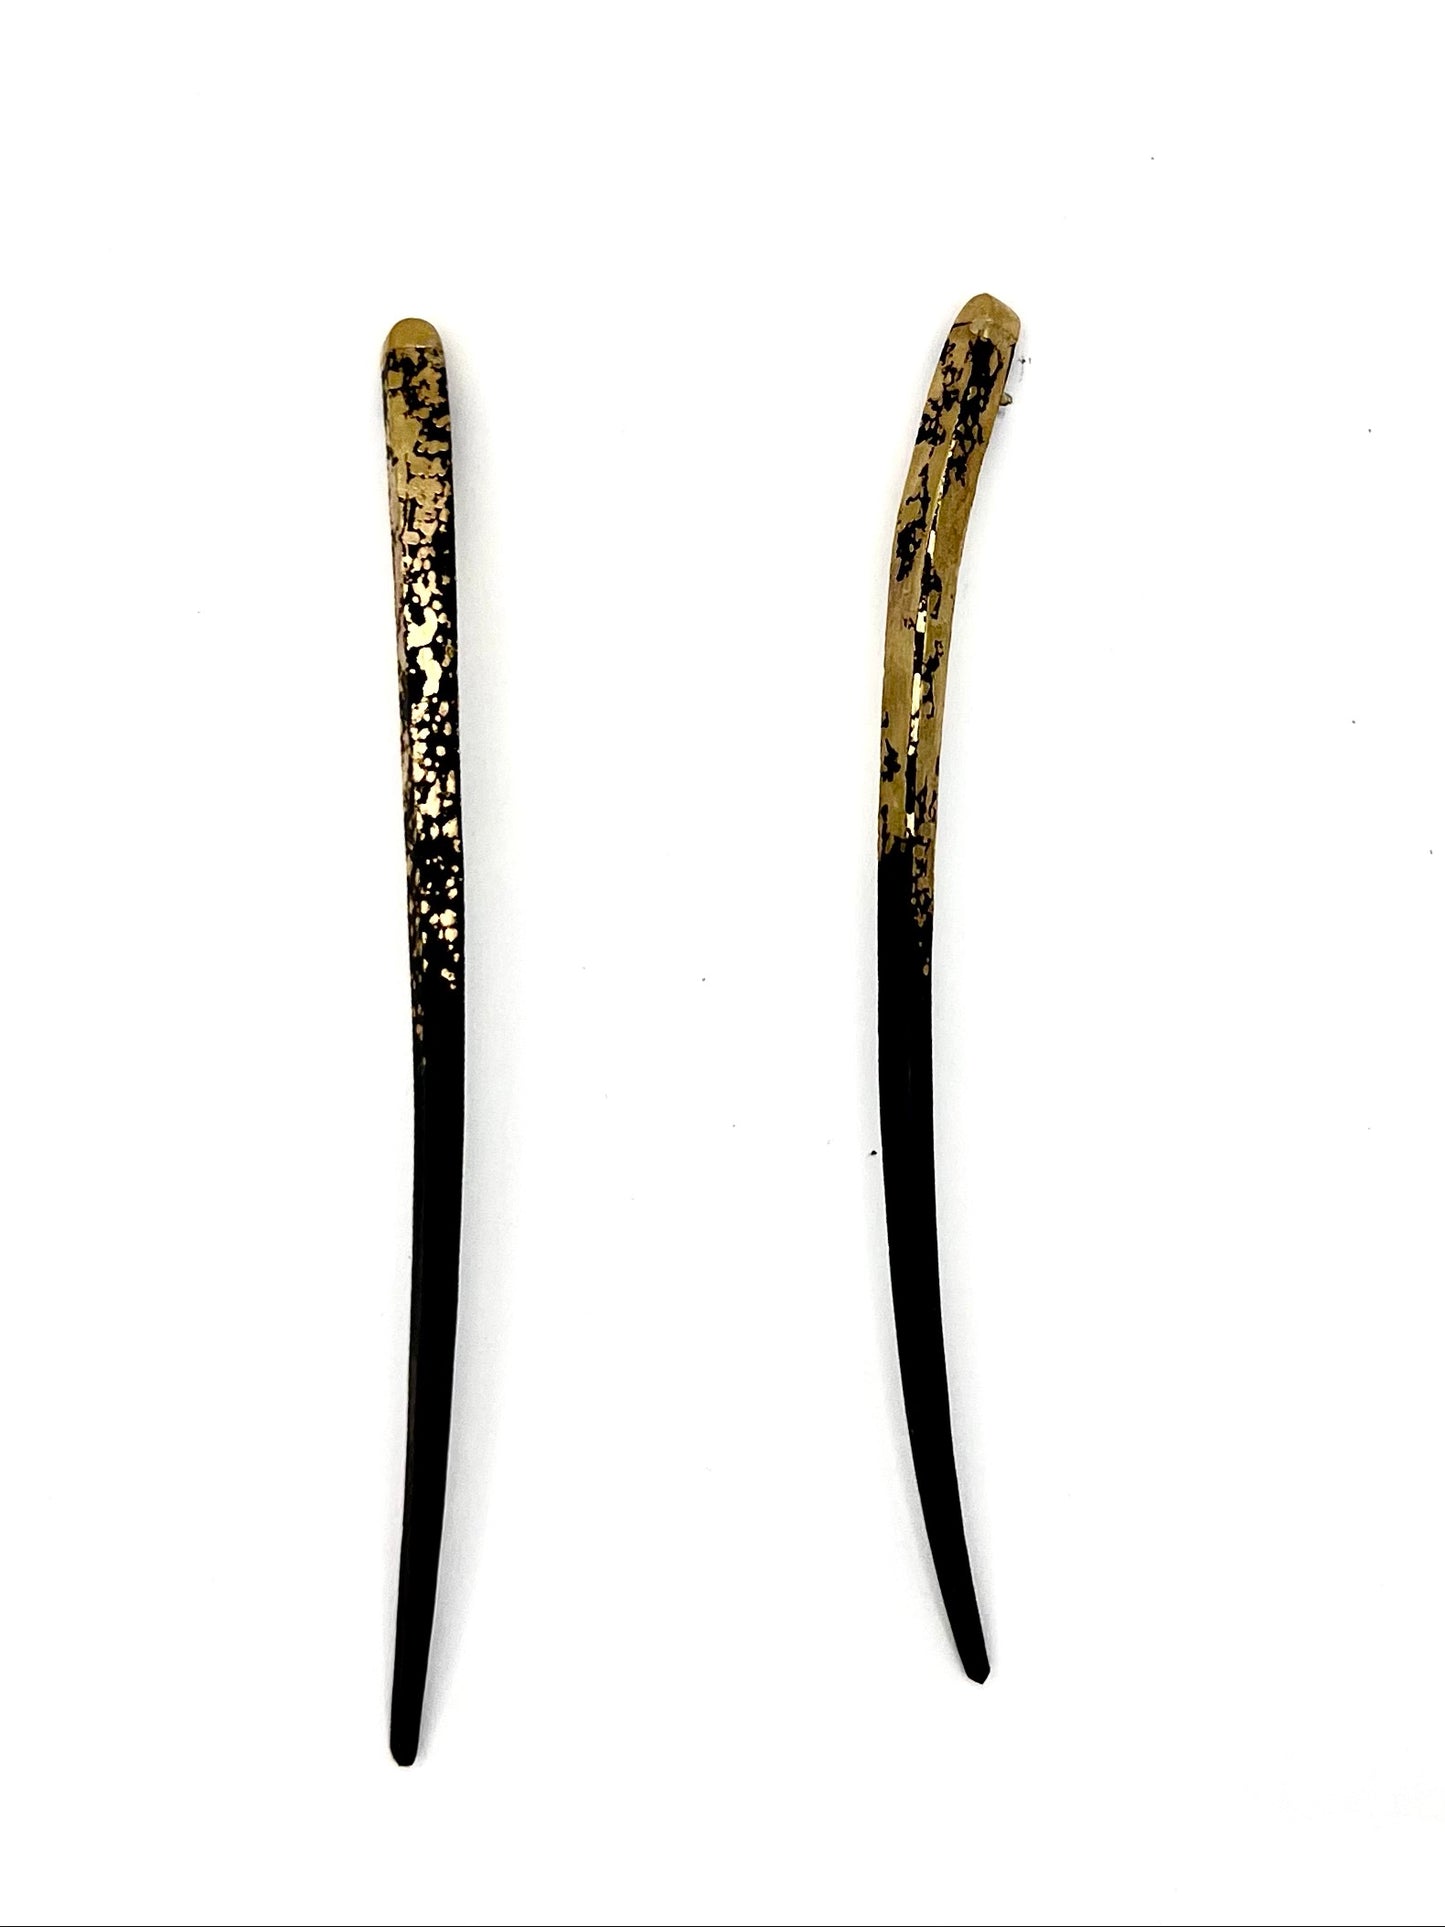 22k Gold and Iron Long Quills Earrings